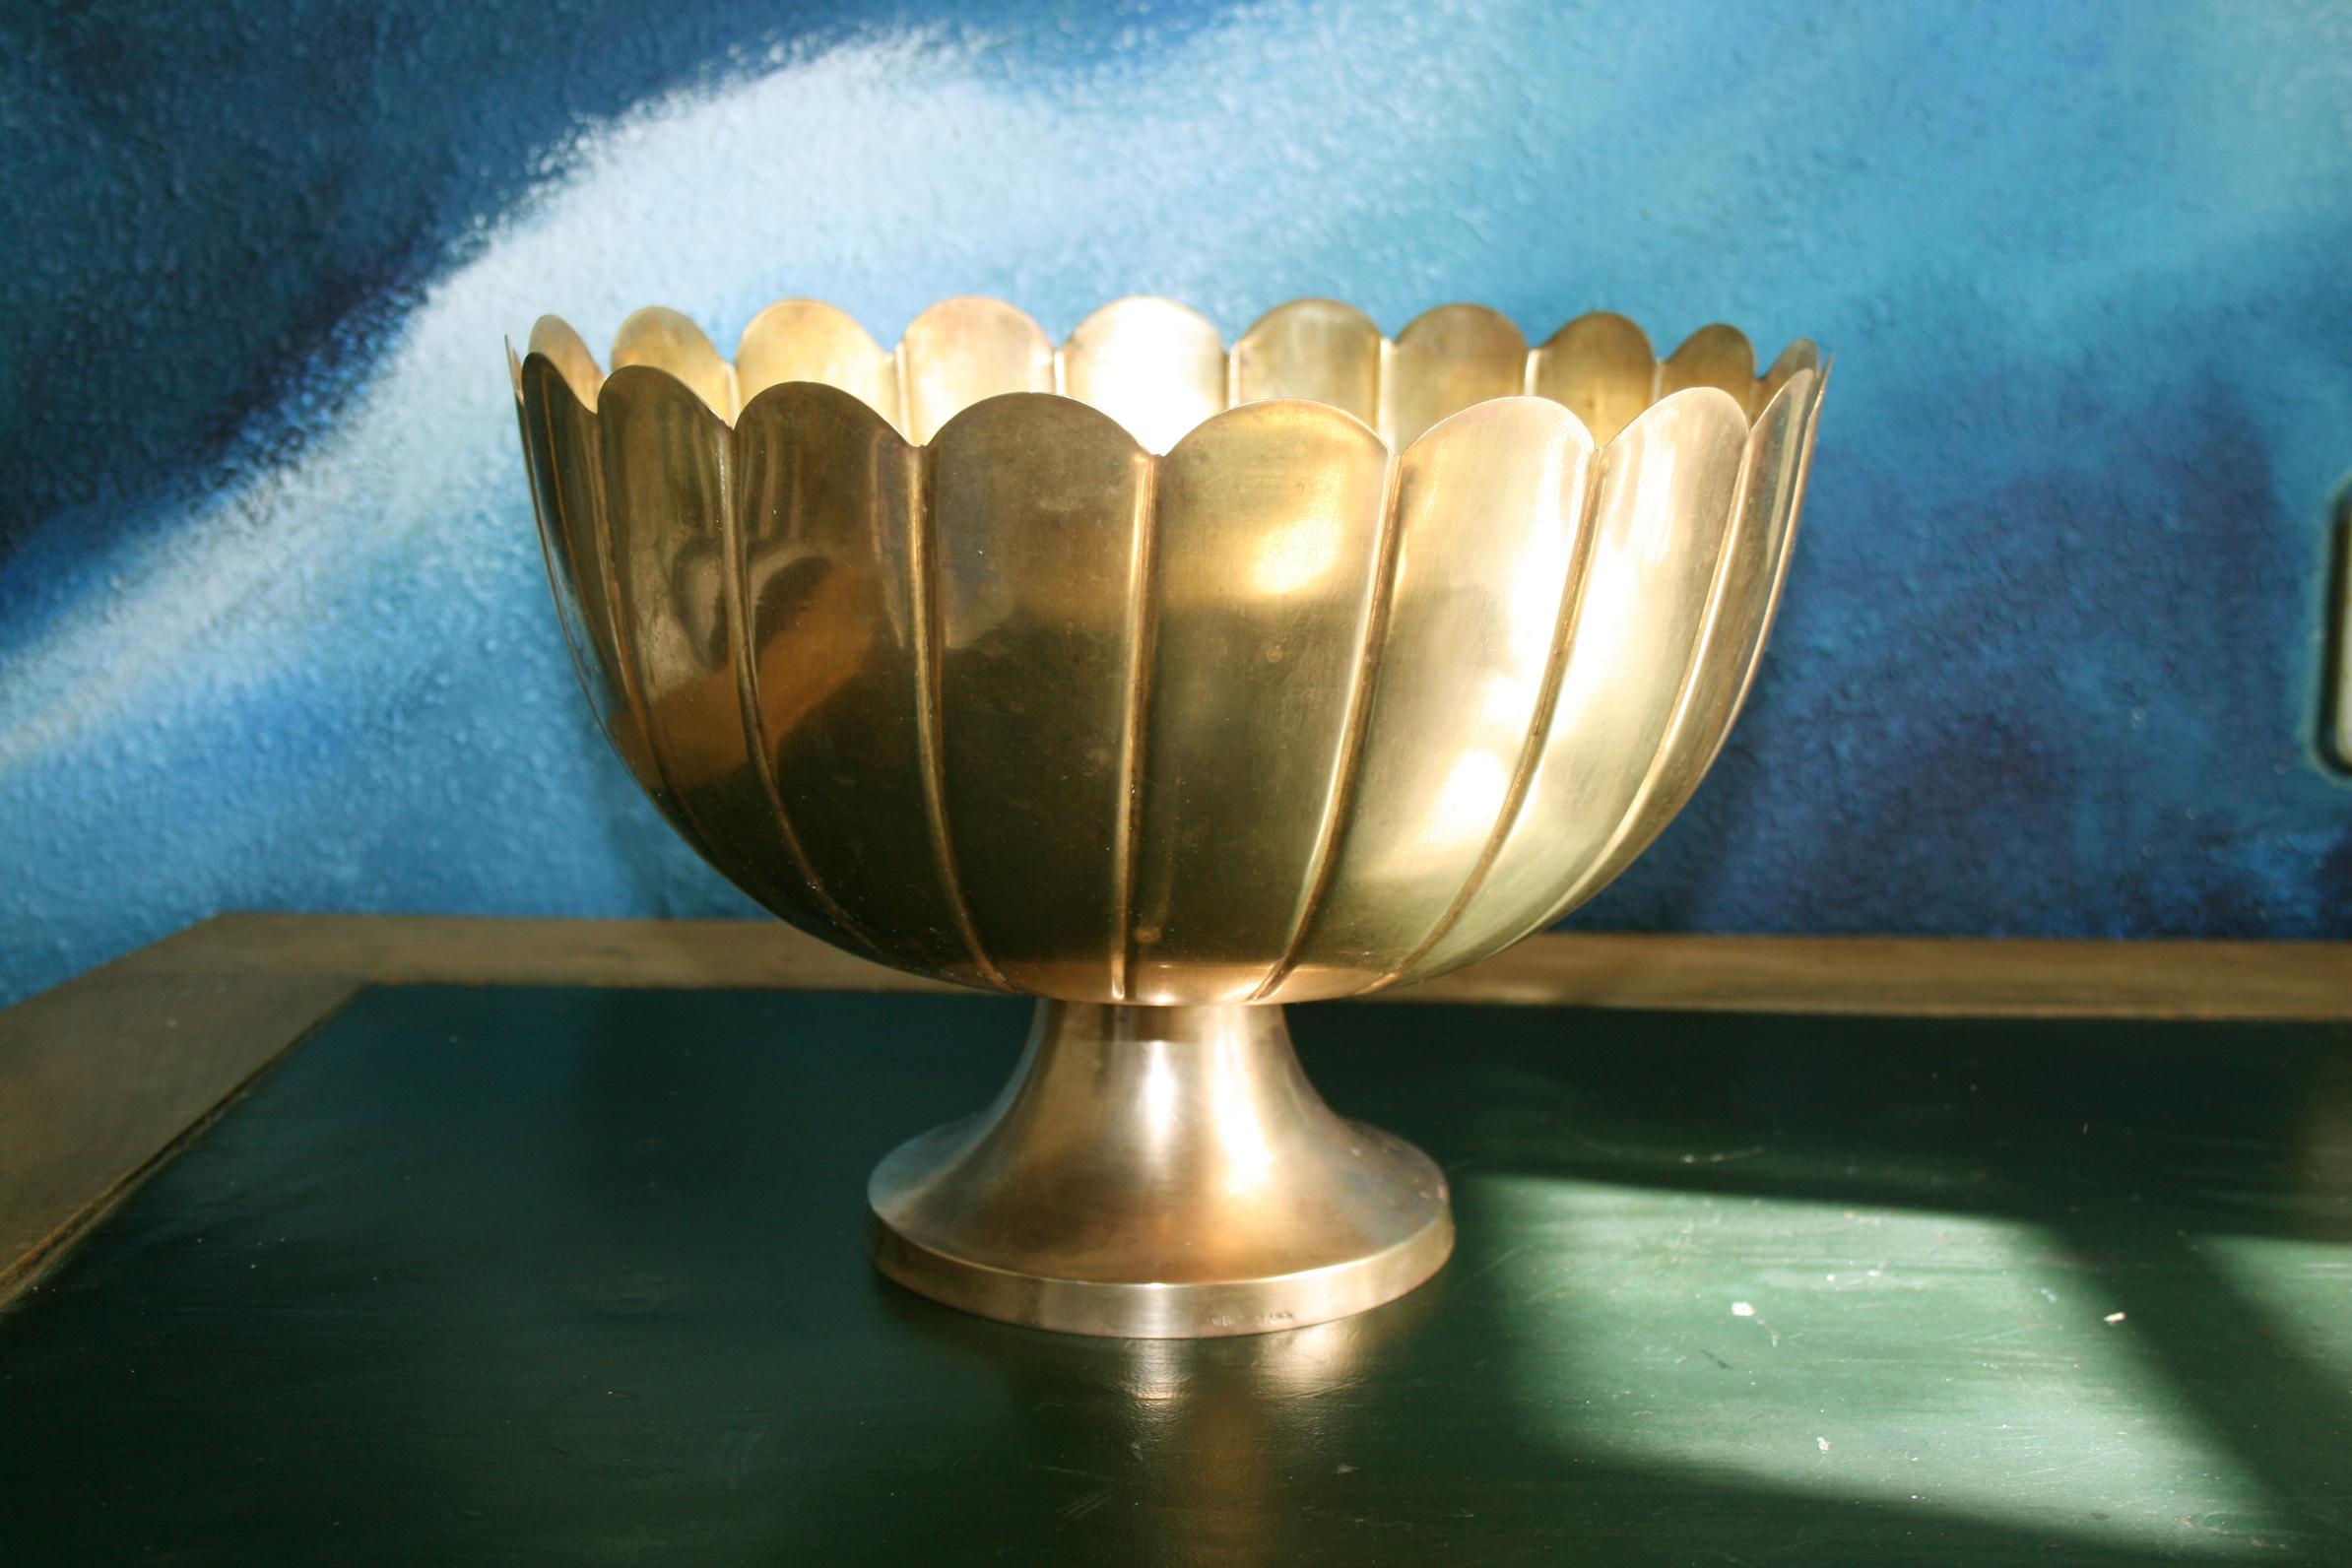 Large brass centerpiece footed bowl in the manner of Josef Hoffmann 

Shaped like a bowl shaped like daisy flower petals on a round base

Early 20th century. It has a beautiful skating.